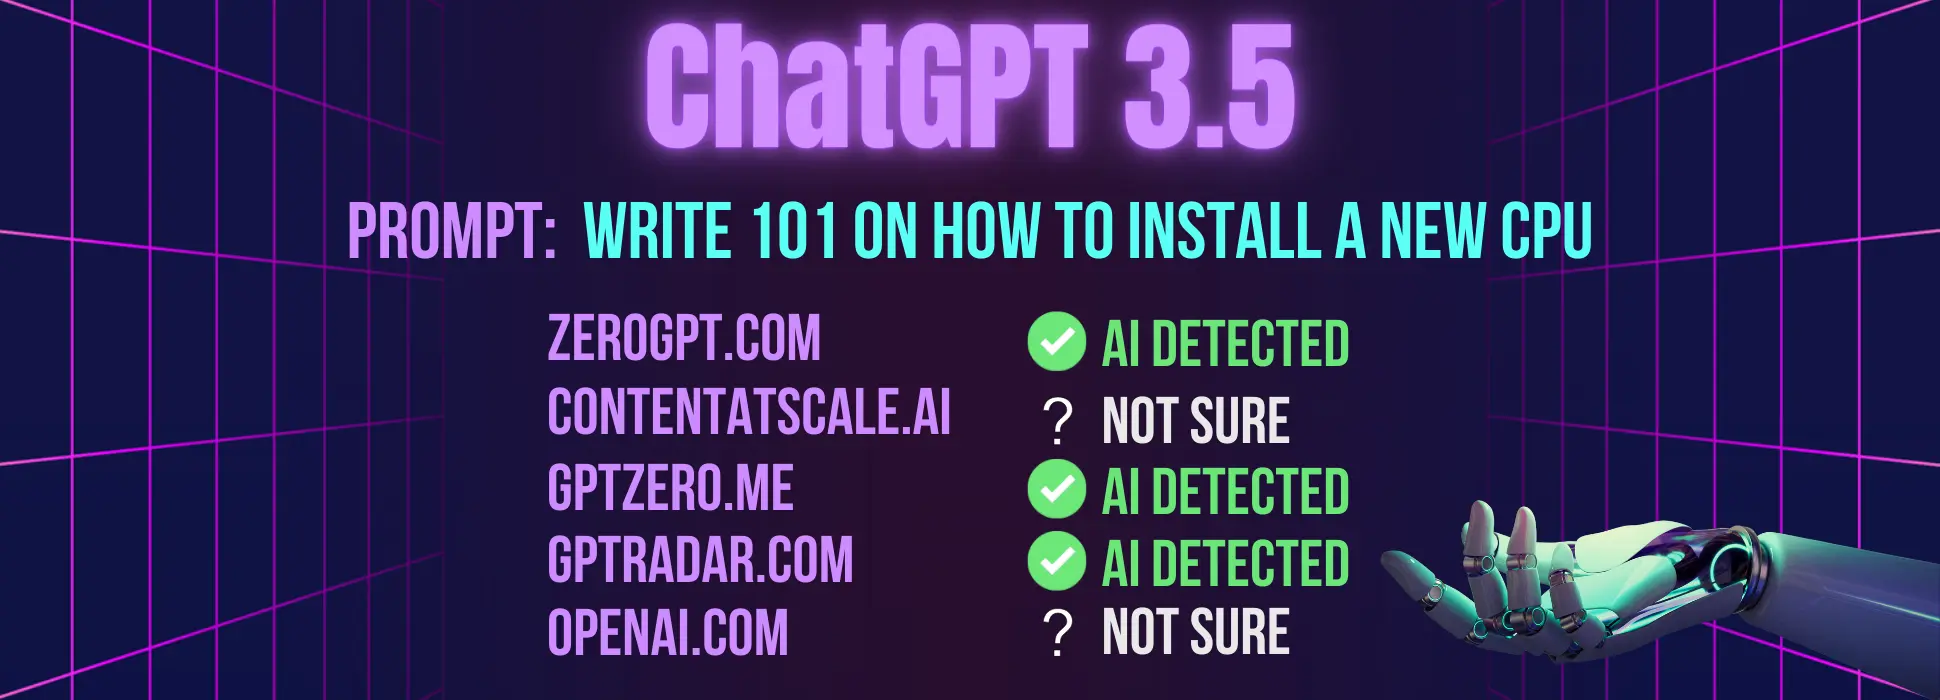 ChatGPT 3.5 results for prompt #2